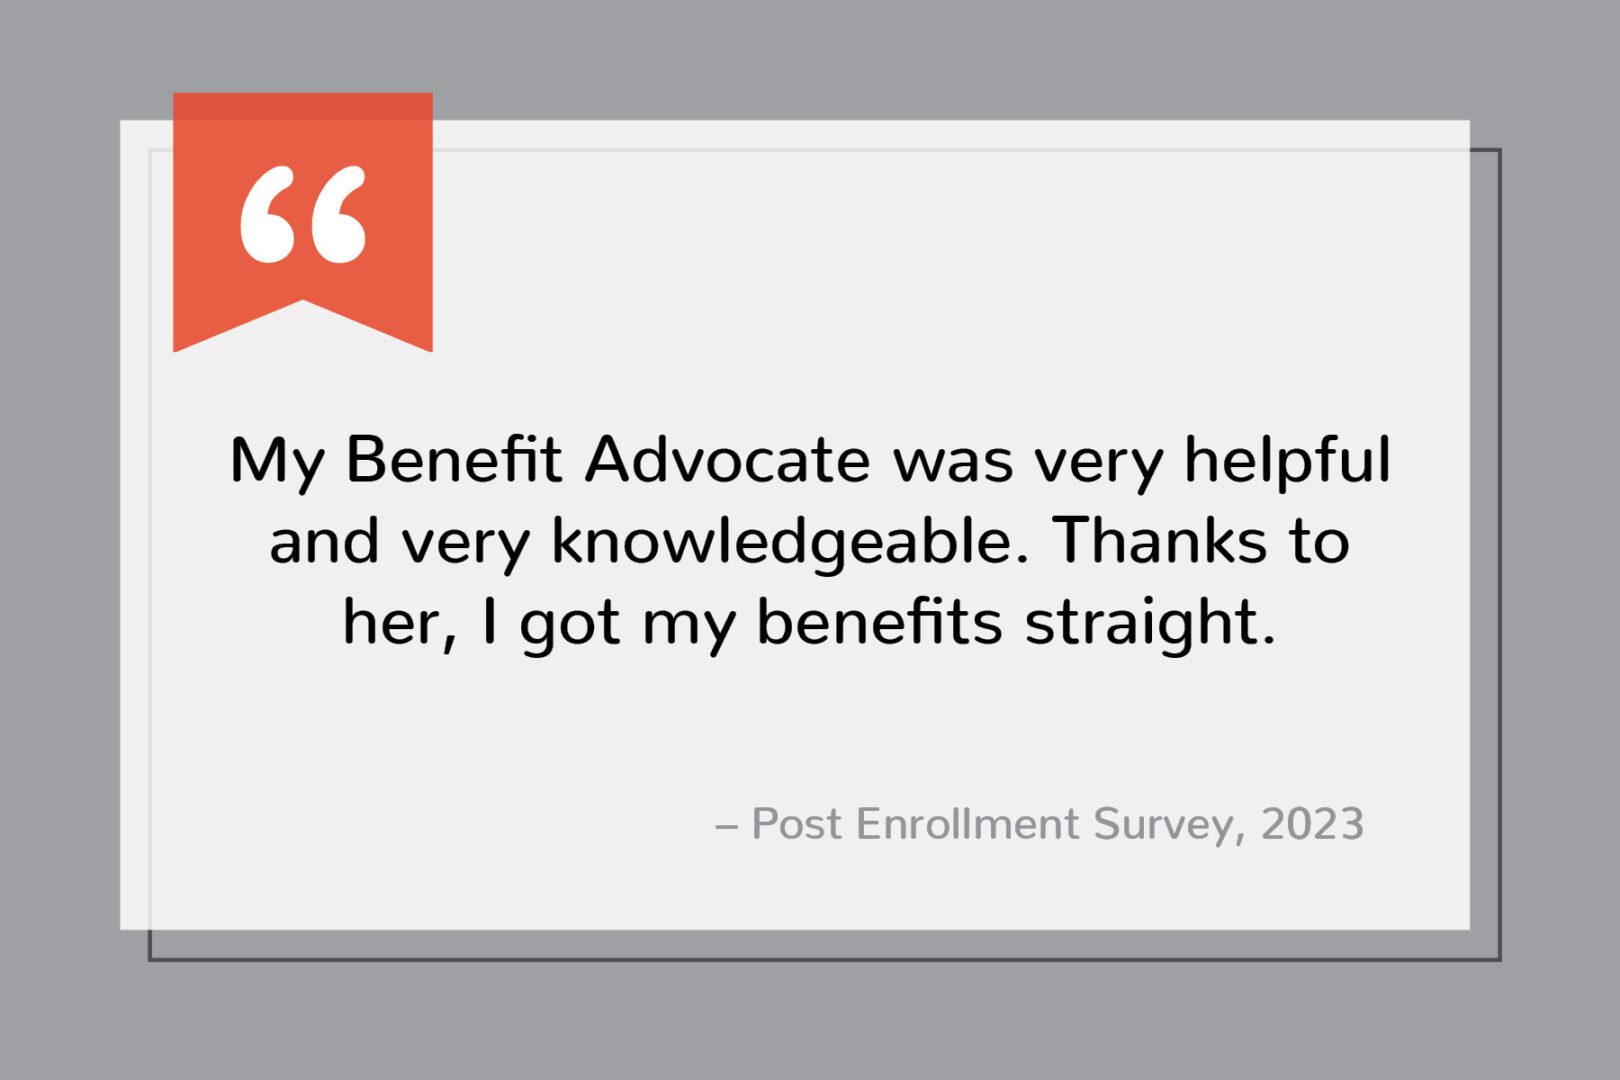 A person 's testimonial for their benefit advocate.